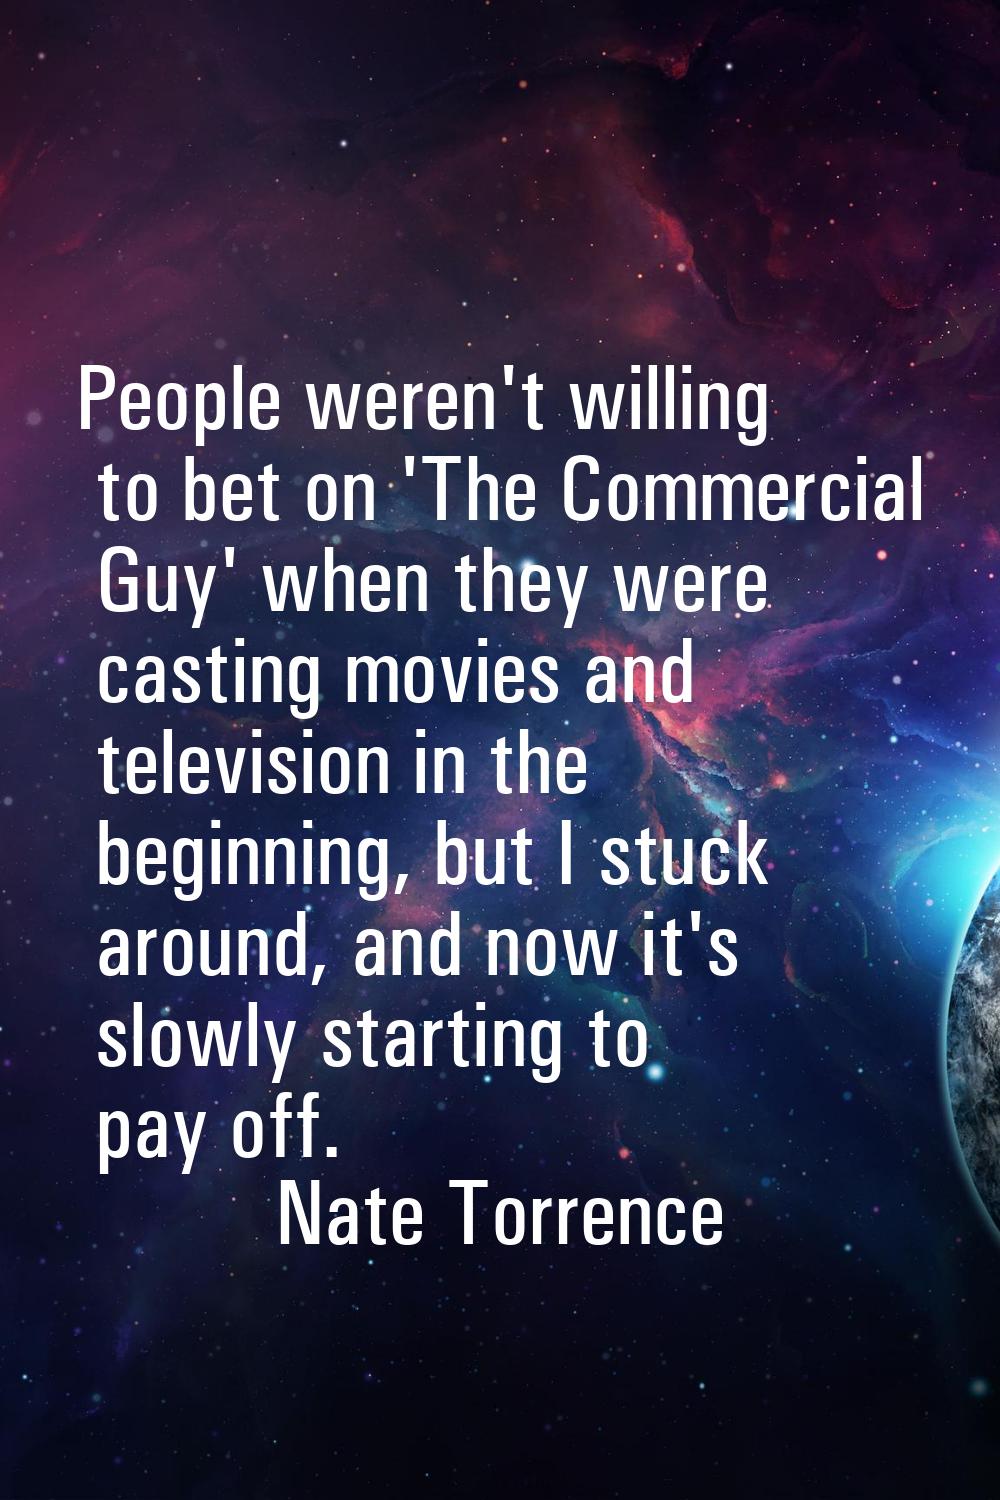 People weren't willing to bet on 'The Commercial Guy' when they were casting movies and television 